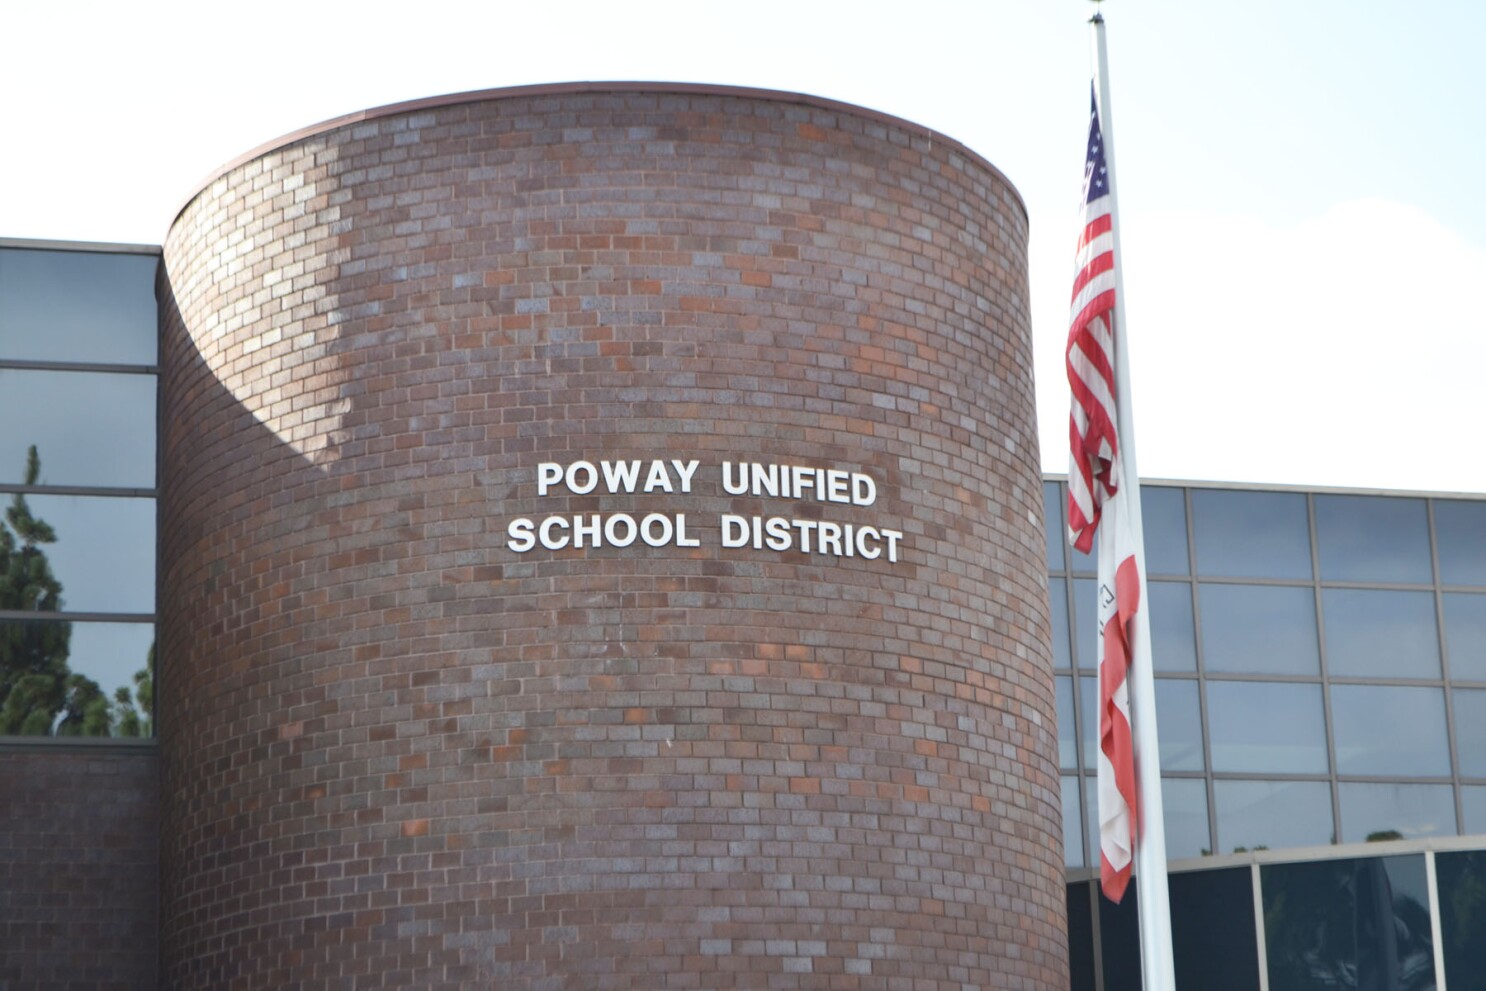 Controversy On Multiple Topics Expressed At Poway Unified Board Meeting - Pomerado News